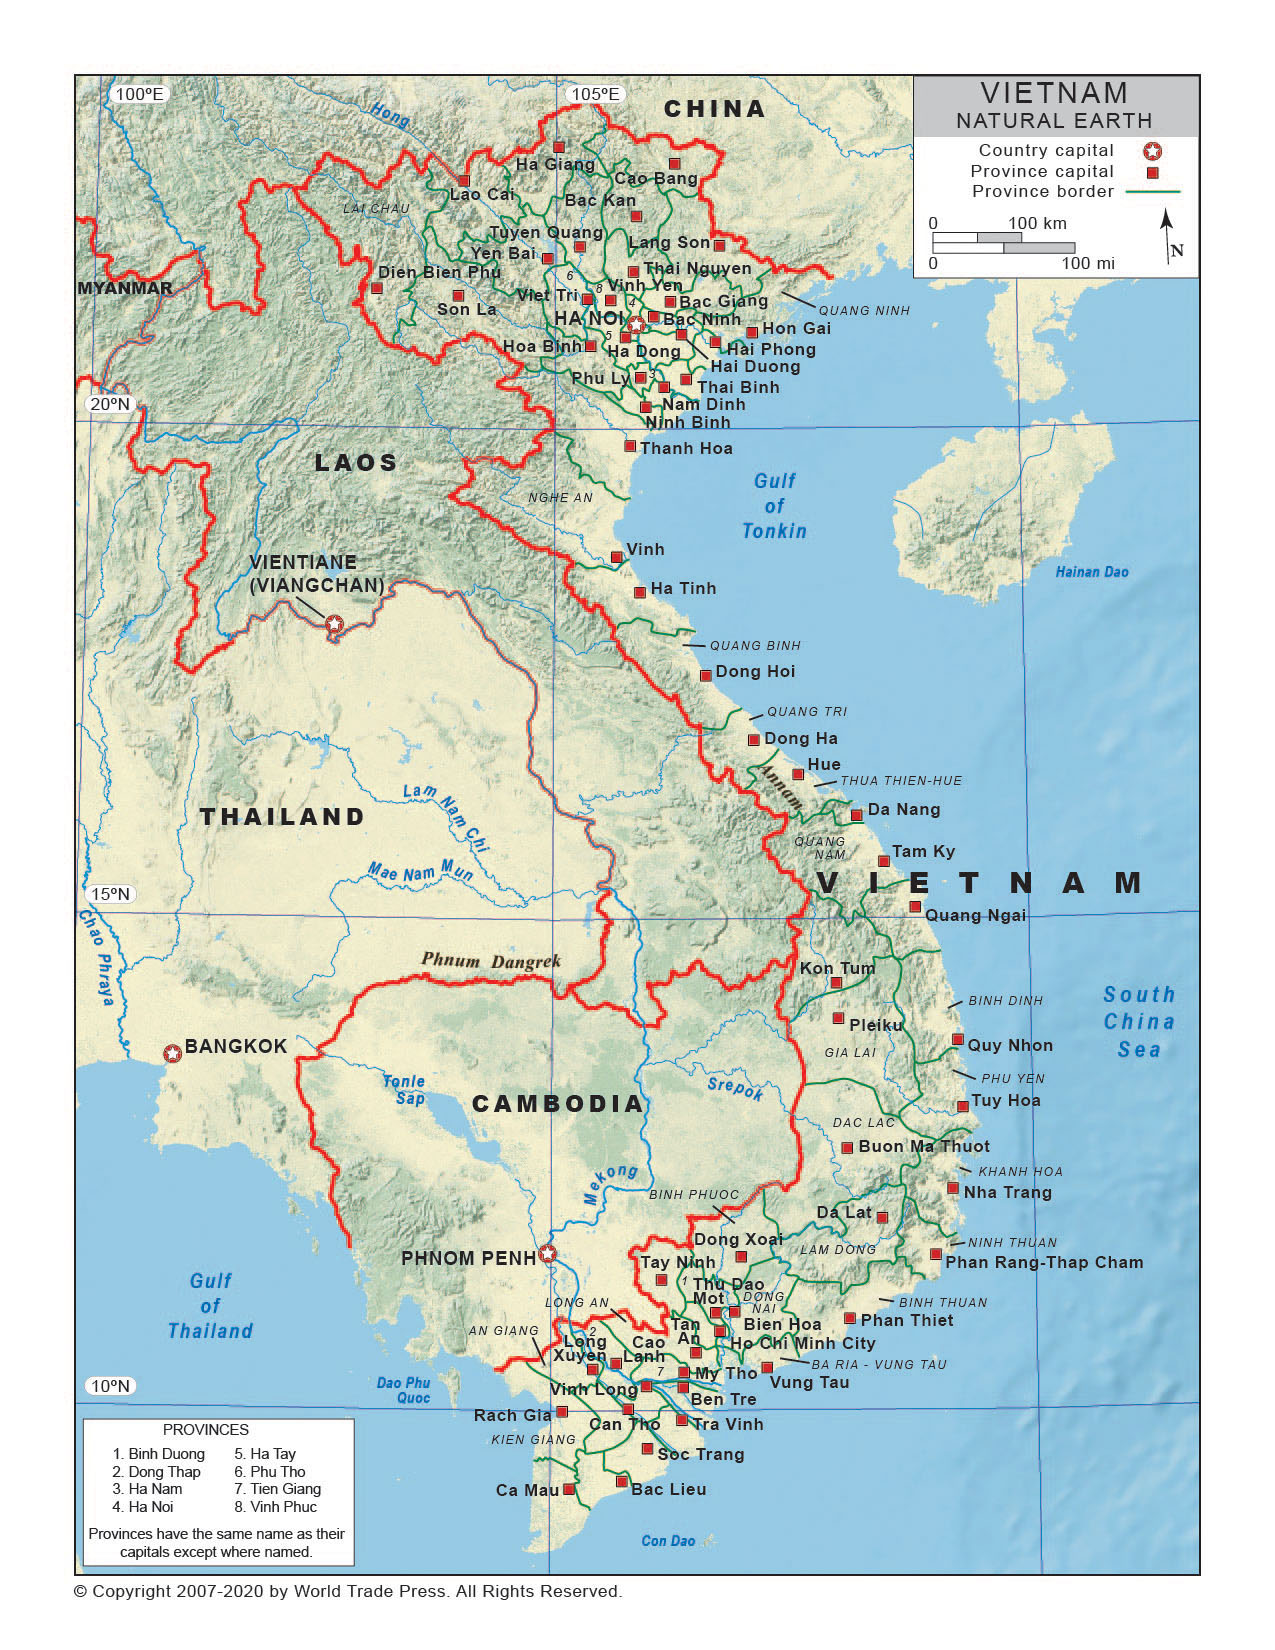 Natural Earth Map of Vietnam